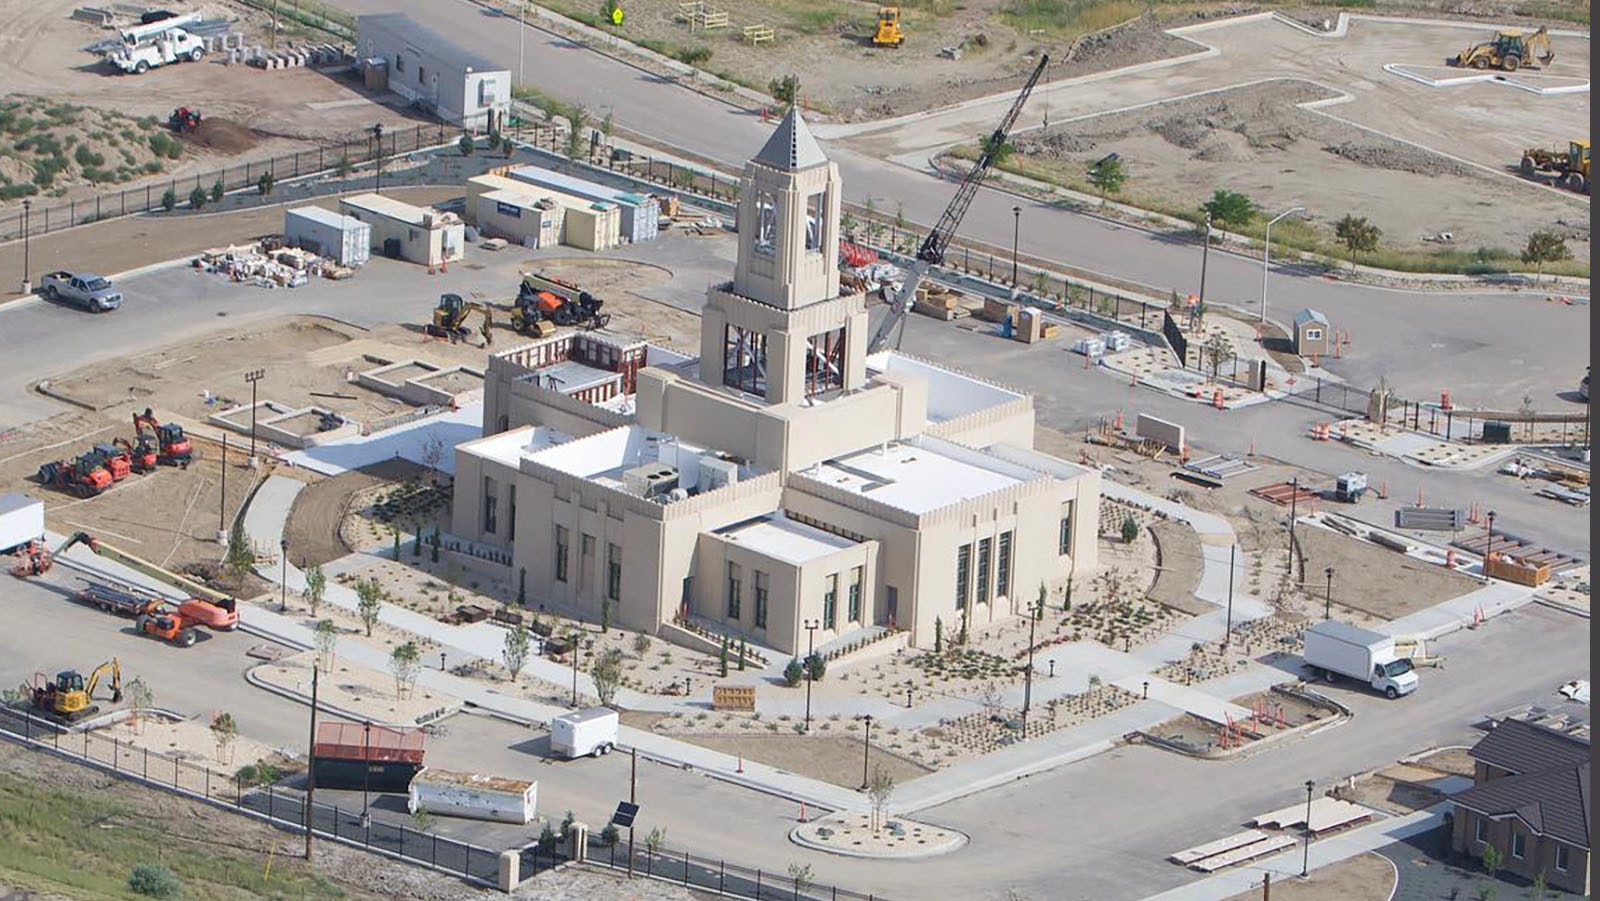 A Church of Jesus Christ of Latter-day Saints temple being built in Casper is similar to one planned for Cody, Wyoming.